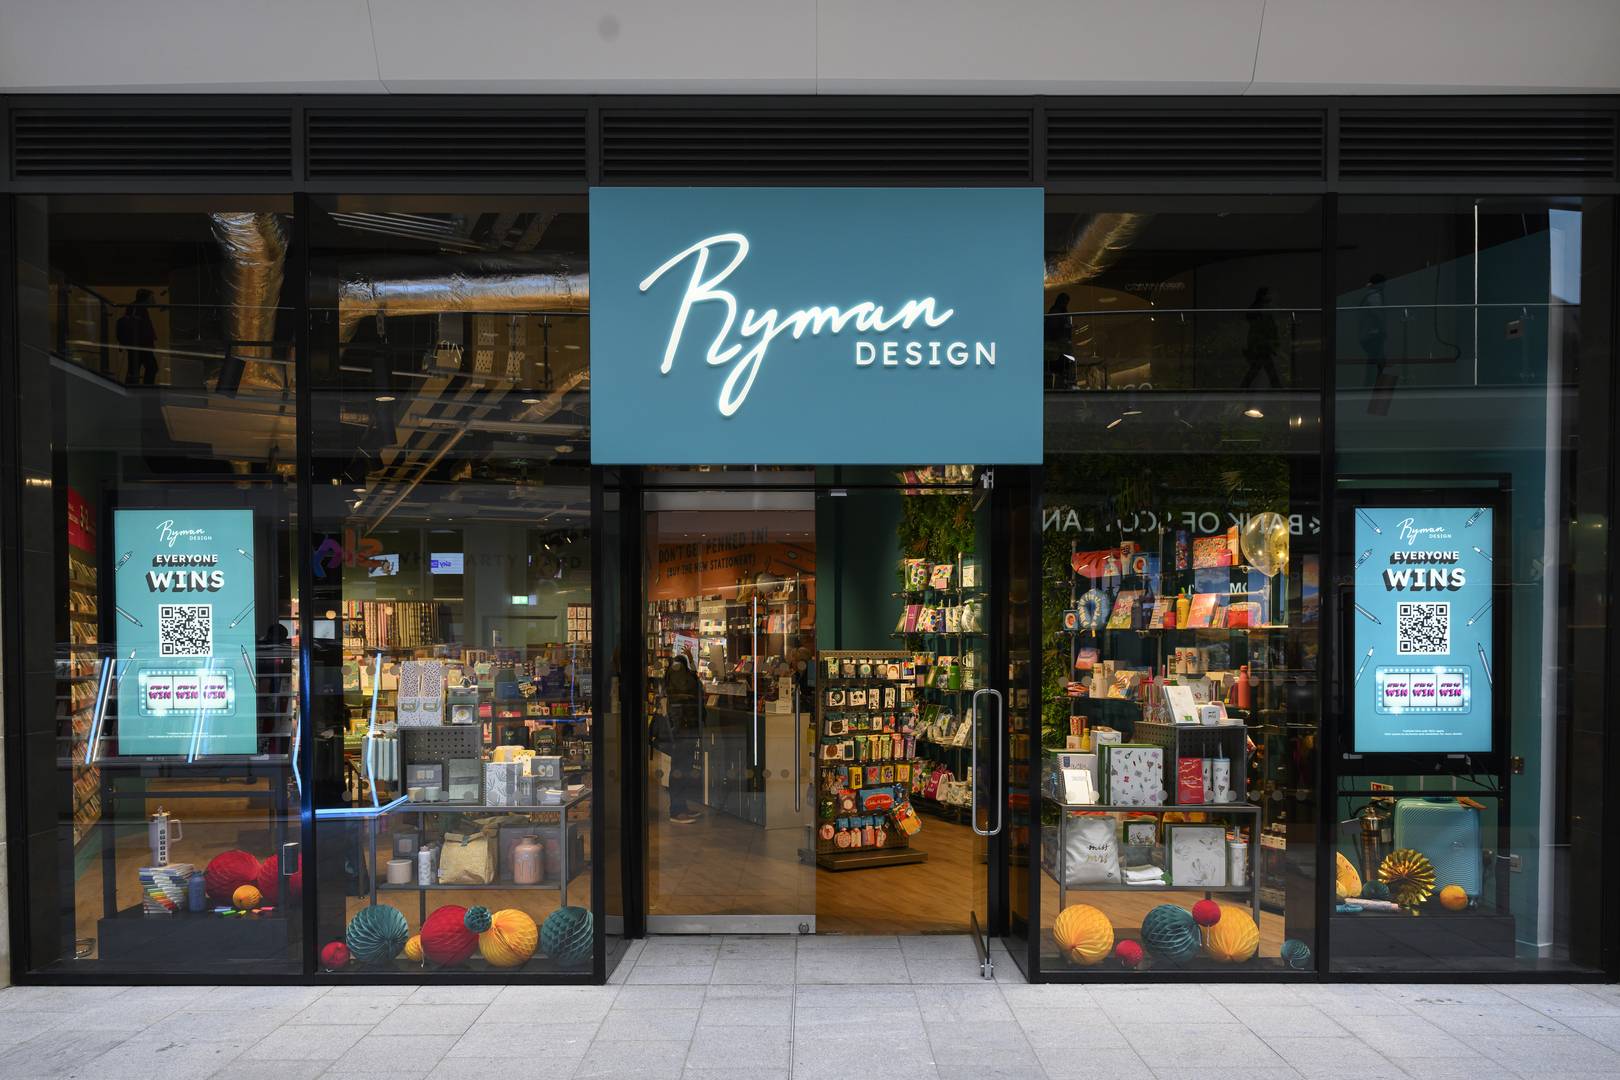 The storefront of Ryman Design Edinburgh. There are two TV screens on either side of the entrance and a large blue 